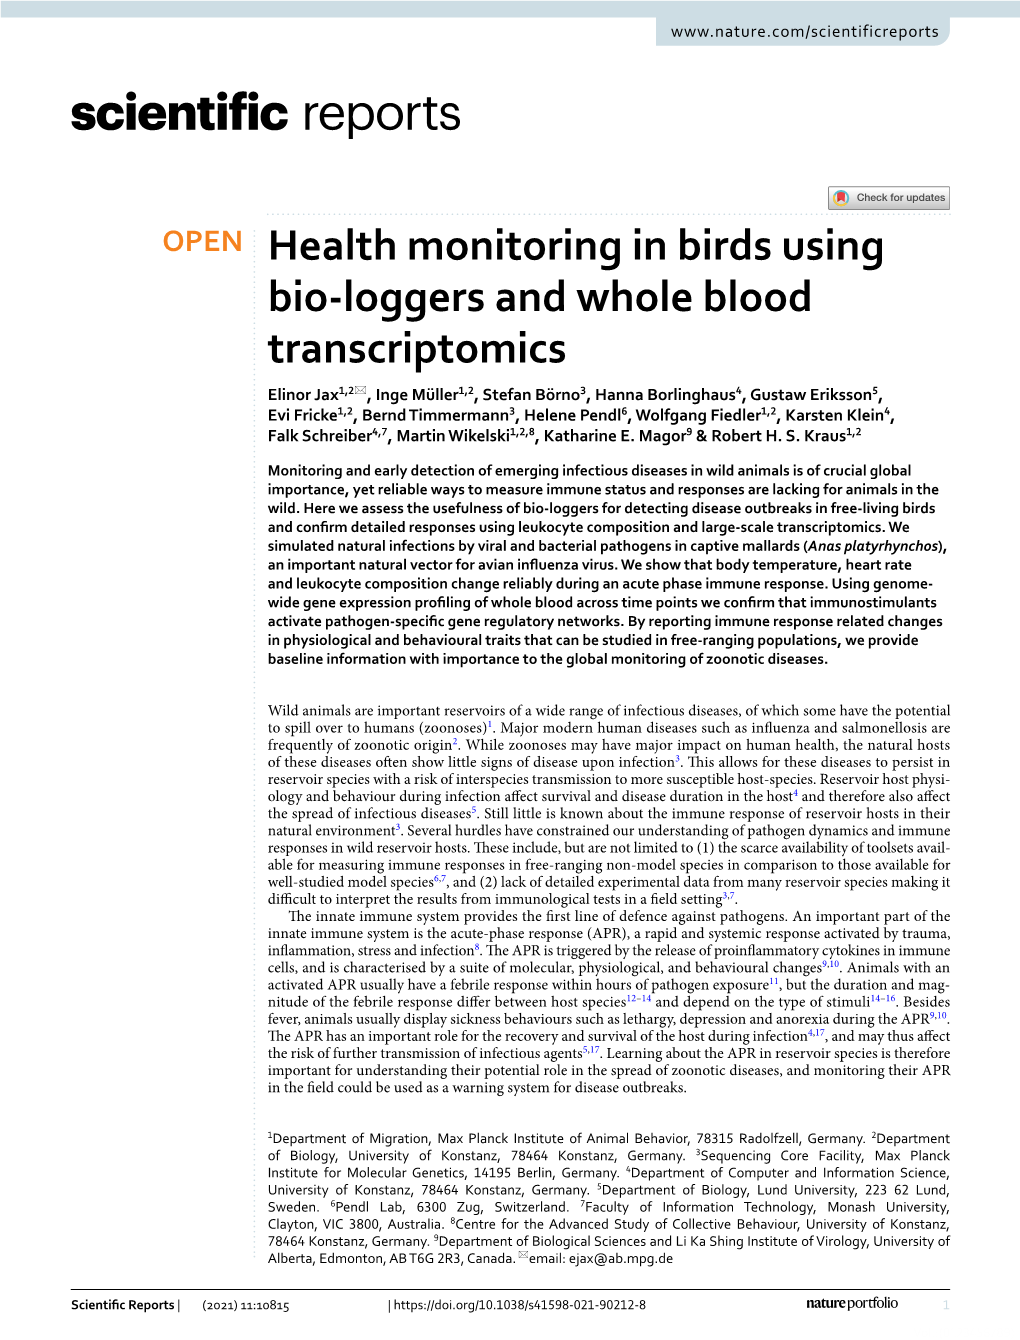 Health Monitoring in Birds Using Bio-Loggers and Whole Blood